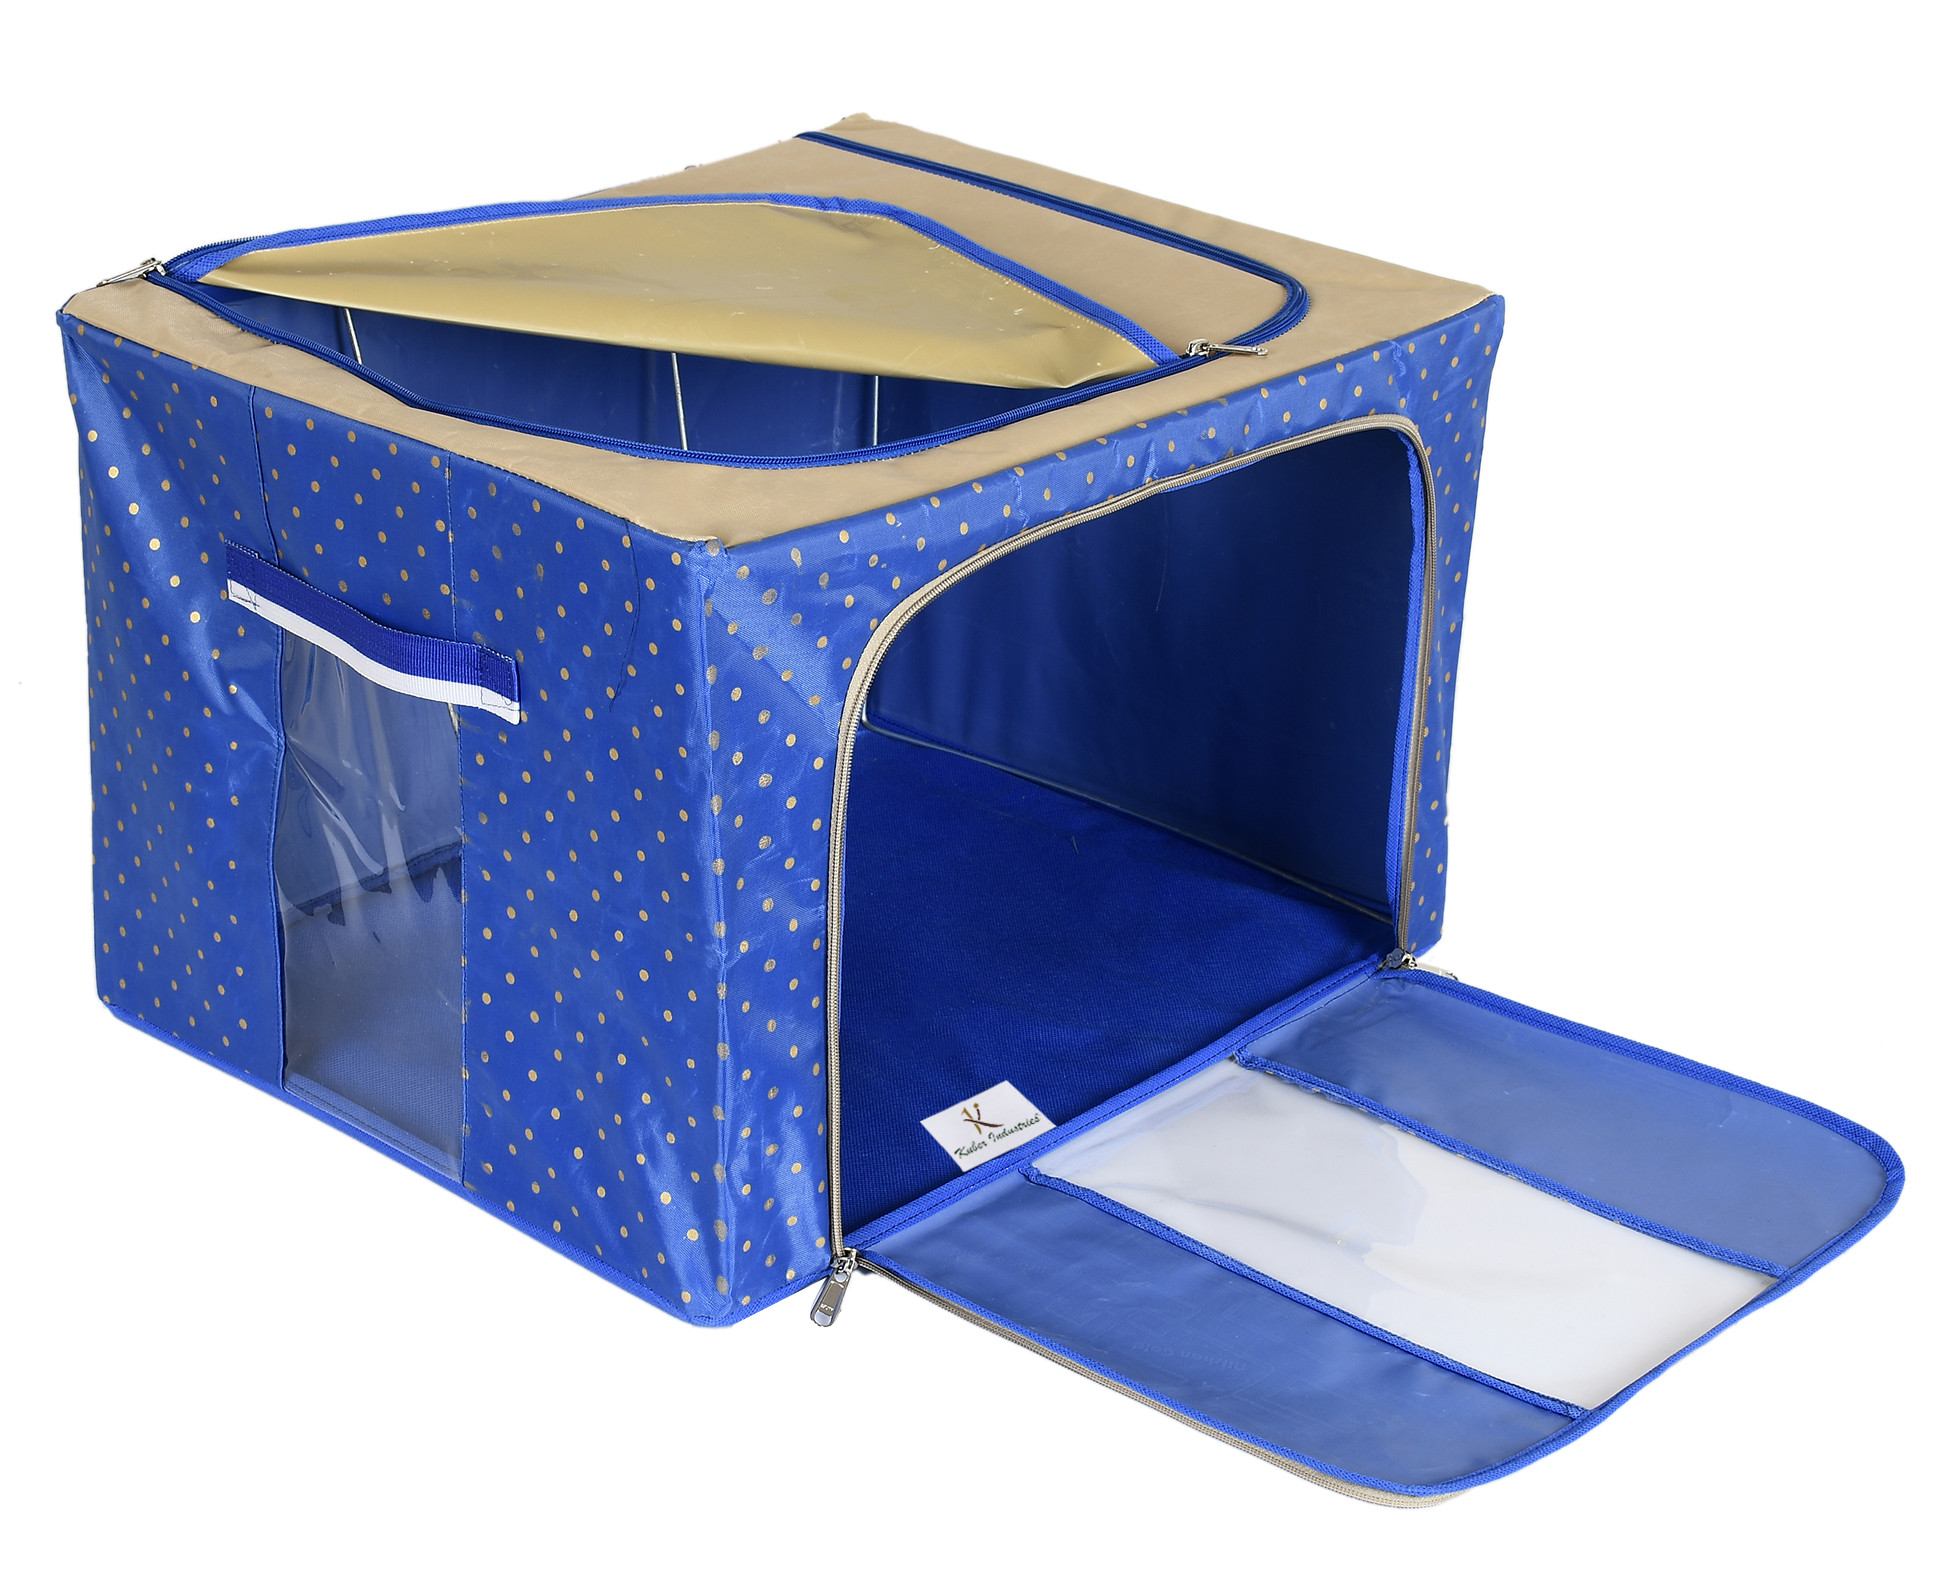 Kuber Industries Dot Printed Steel Frame Storage Box/Organizer For Clothing, Blankets, Bedding With Clear Window, 66Ltr. (Blue & Brown)-44KM0249